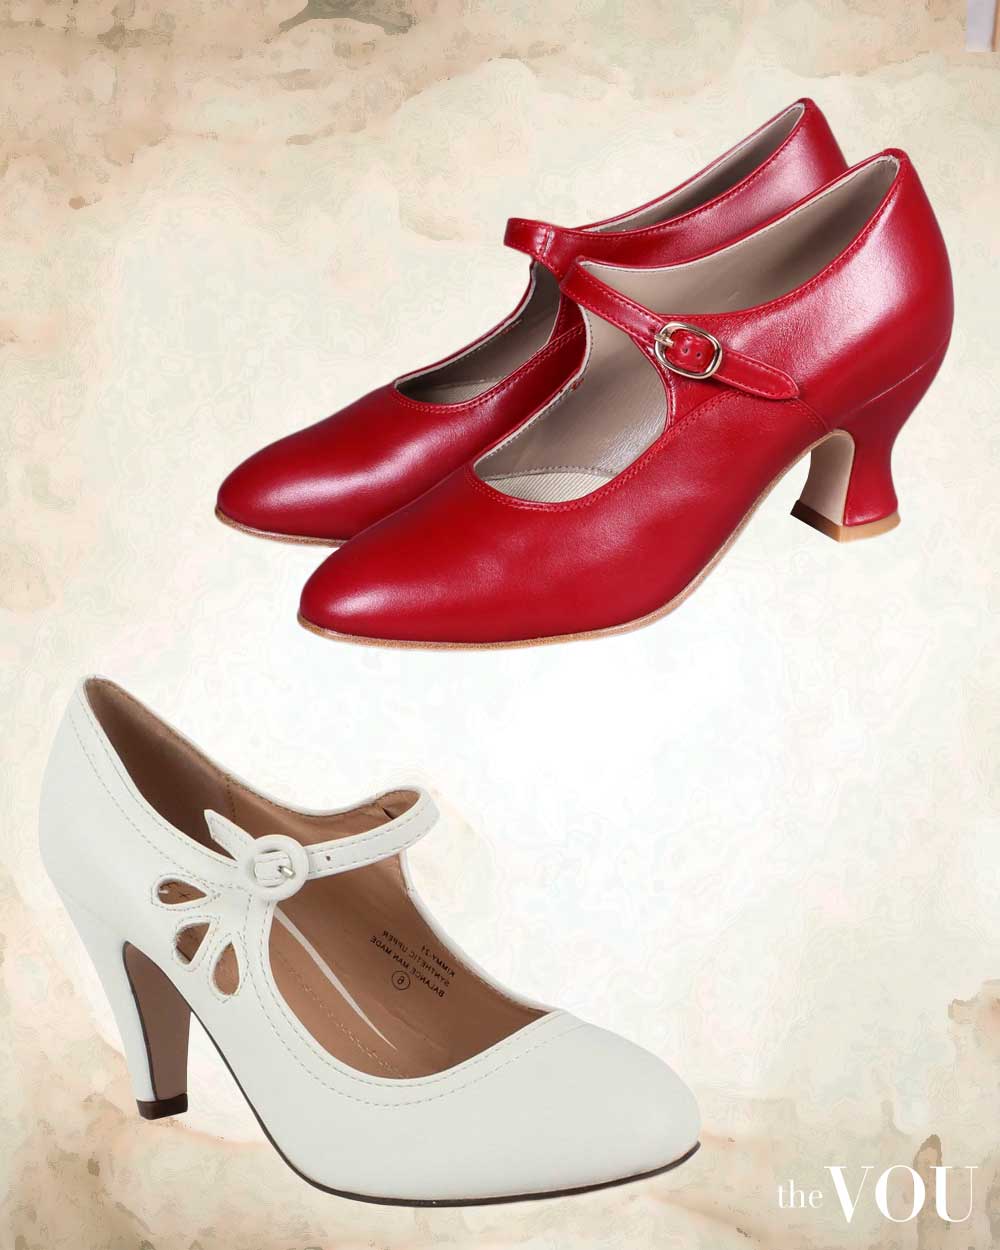 Mary Jane Pump Shoes in the 1920s Fashion